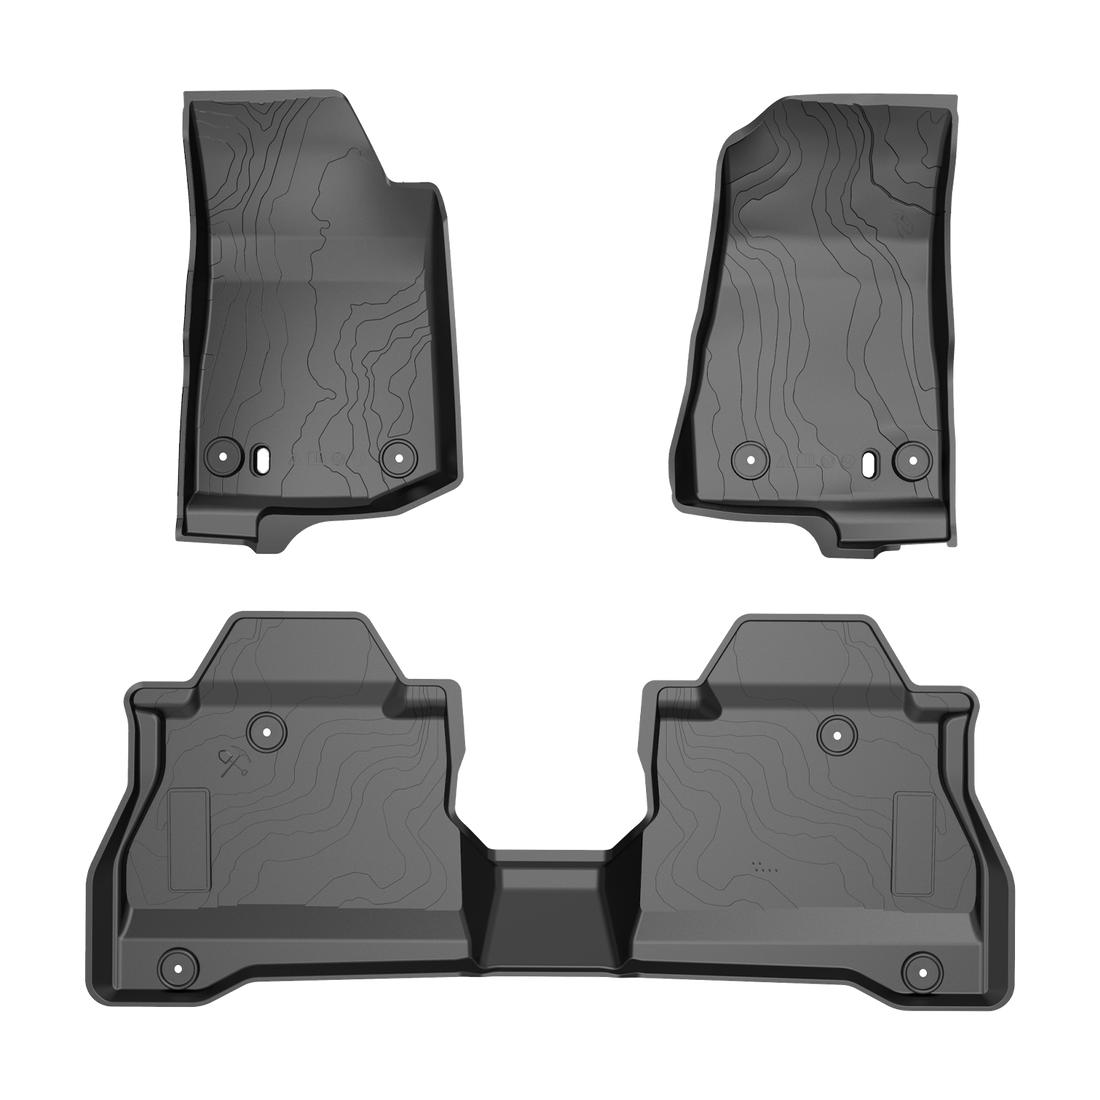 JOYTUTUS Floor Mats Fit for Gladiator 2020 2021 2022 2024, TPE All Weather Protection Floor Mats